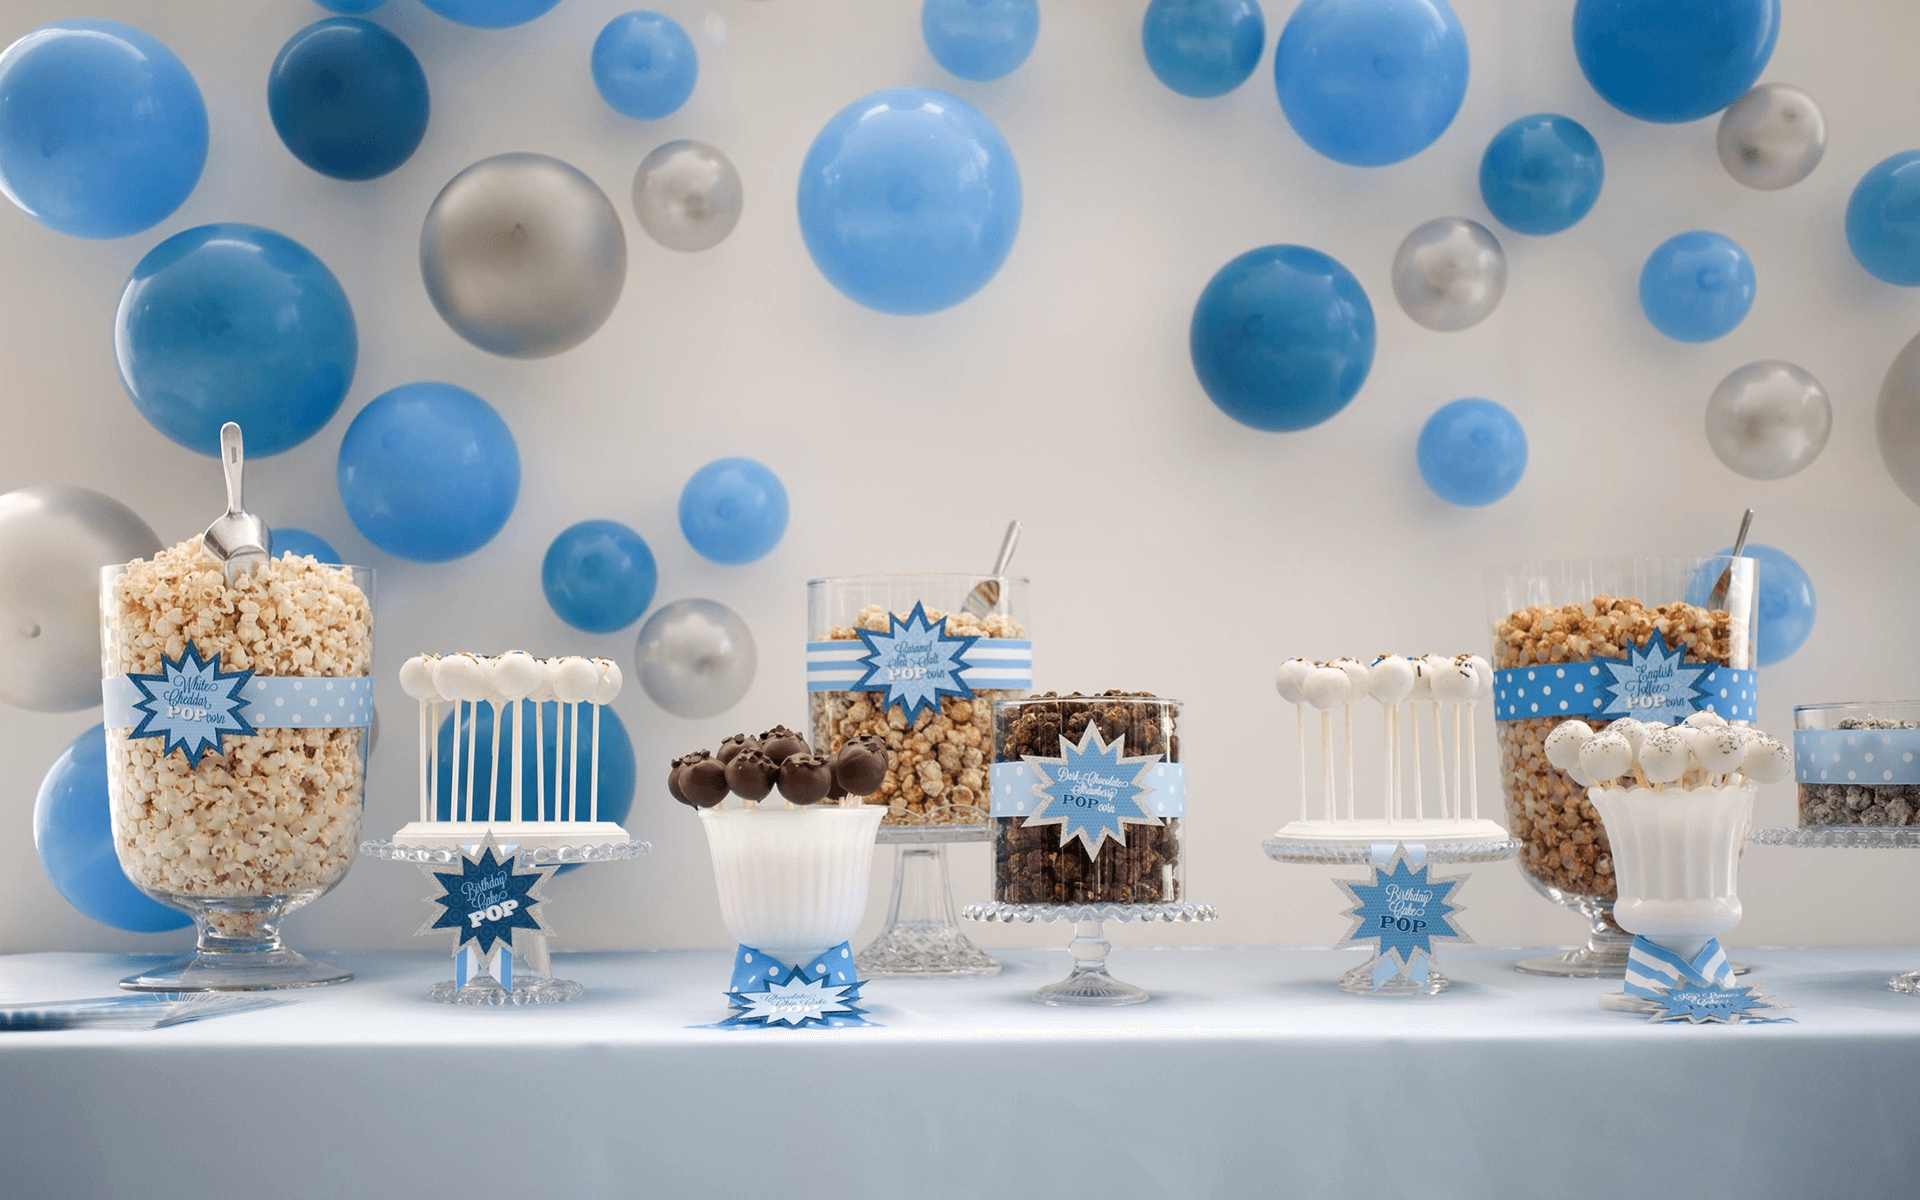 10 Most Recommended Baby Shower Candy Table Ideas 2022 - EroFound